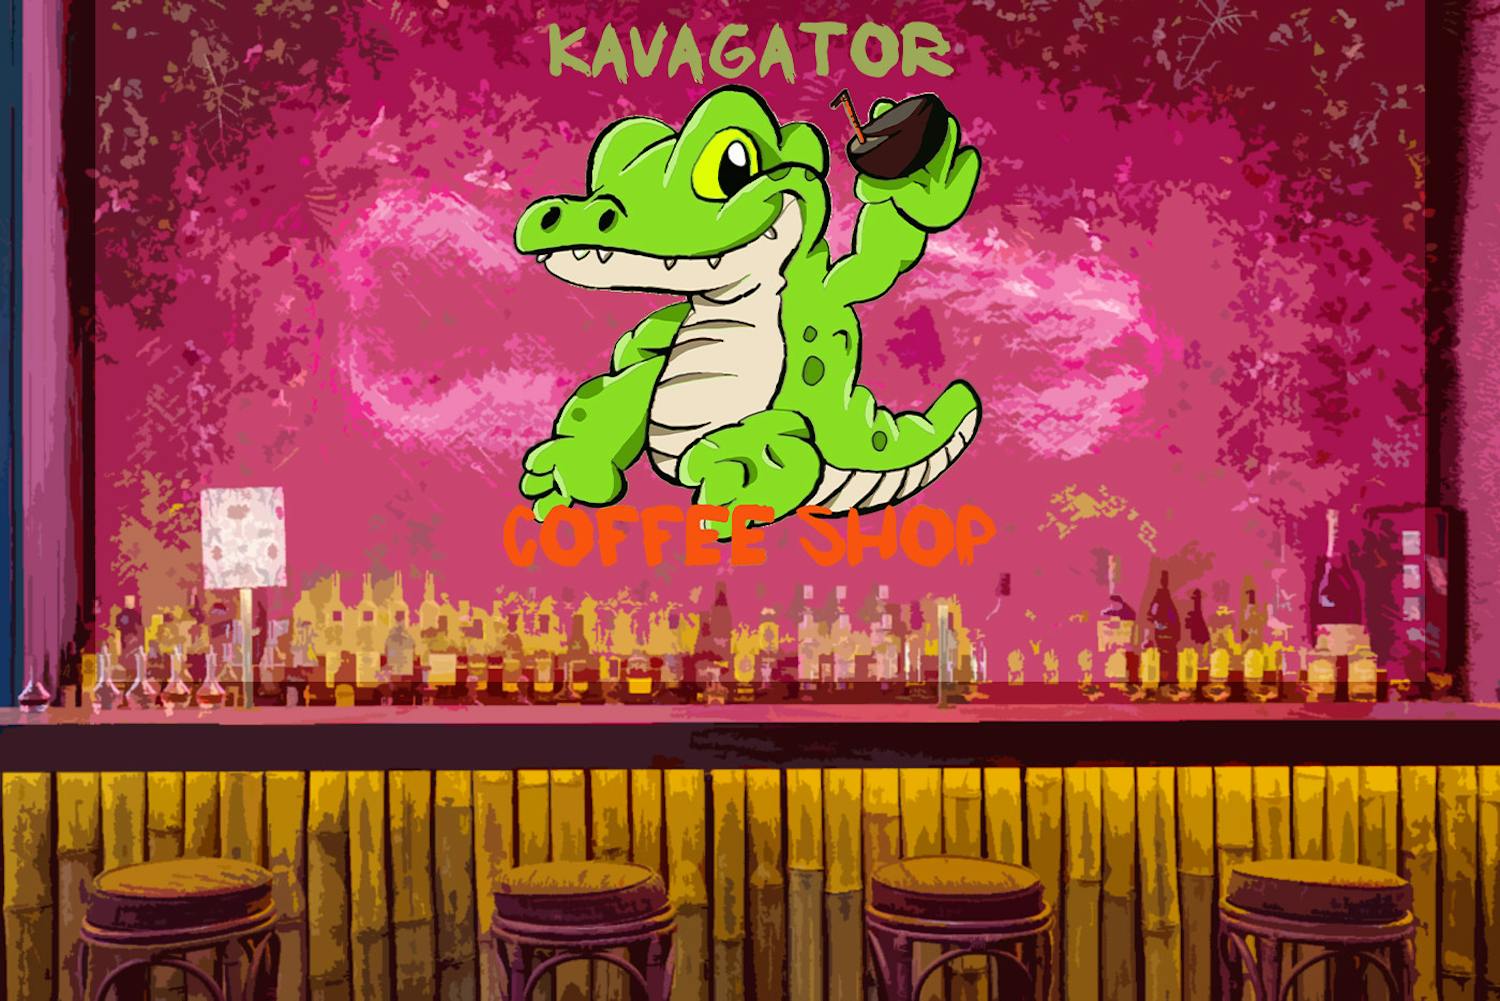 Kava Gator opened earlier this year, and it aims to educate its customers on the use of varied botanical substances